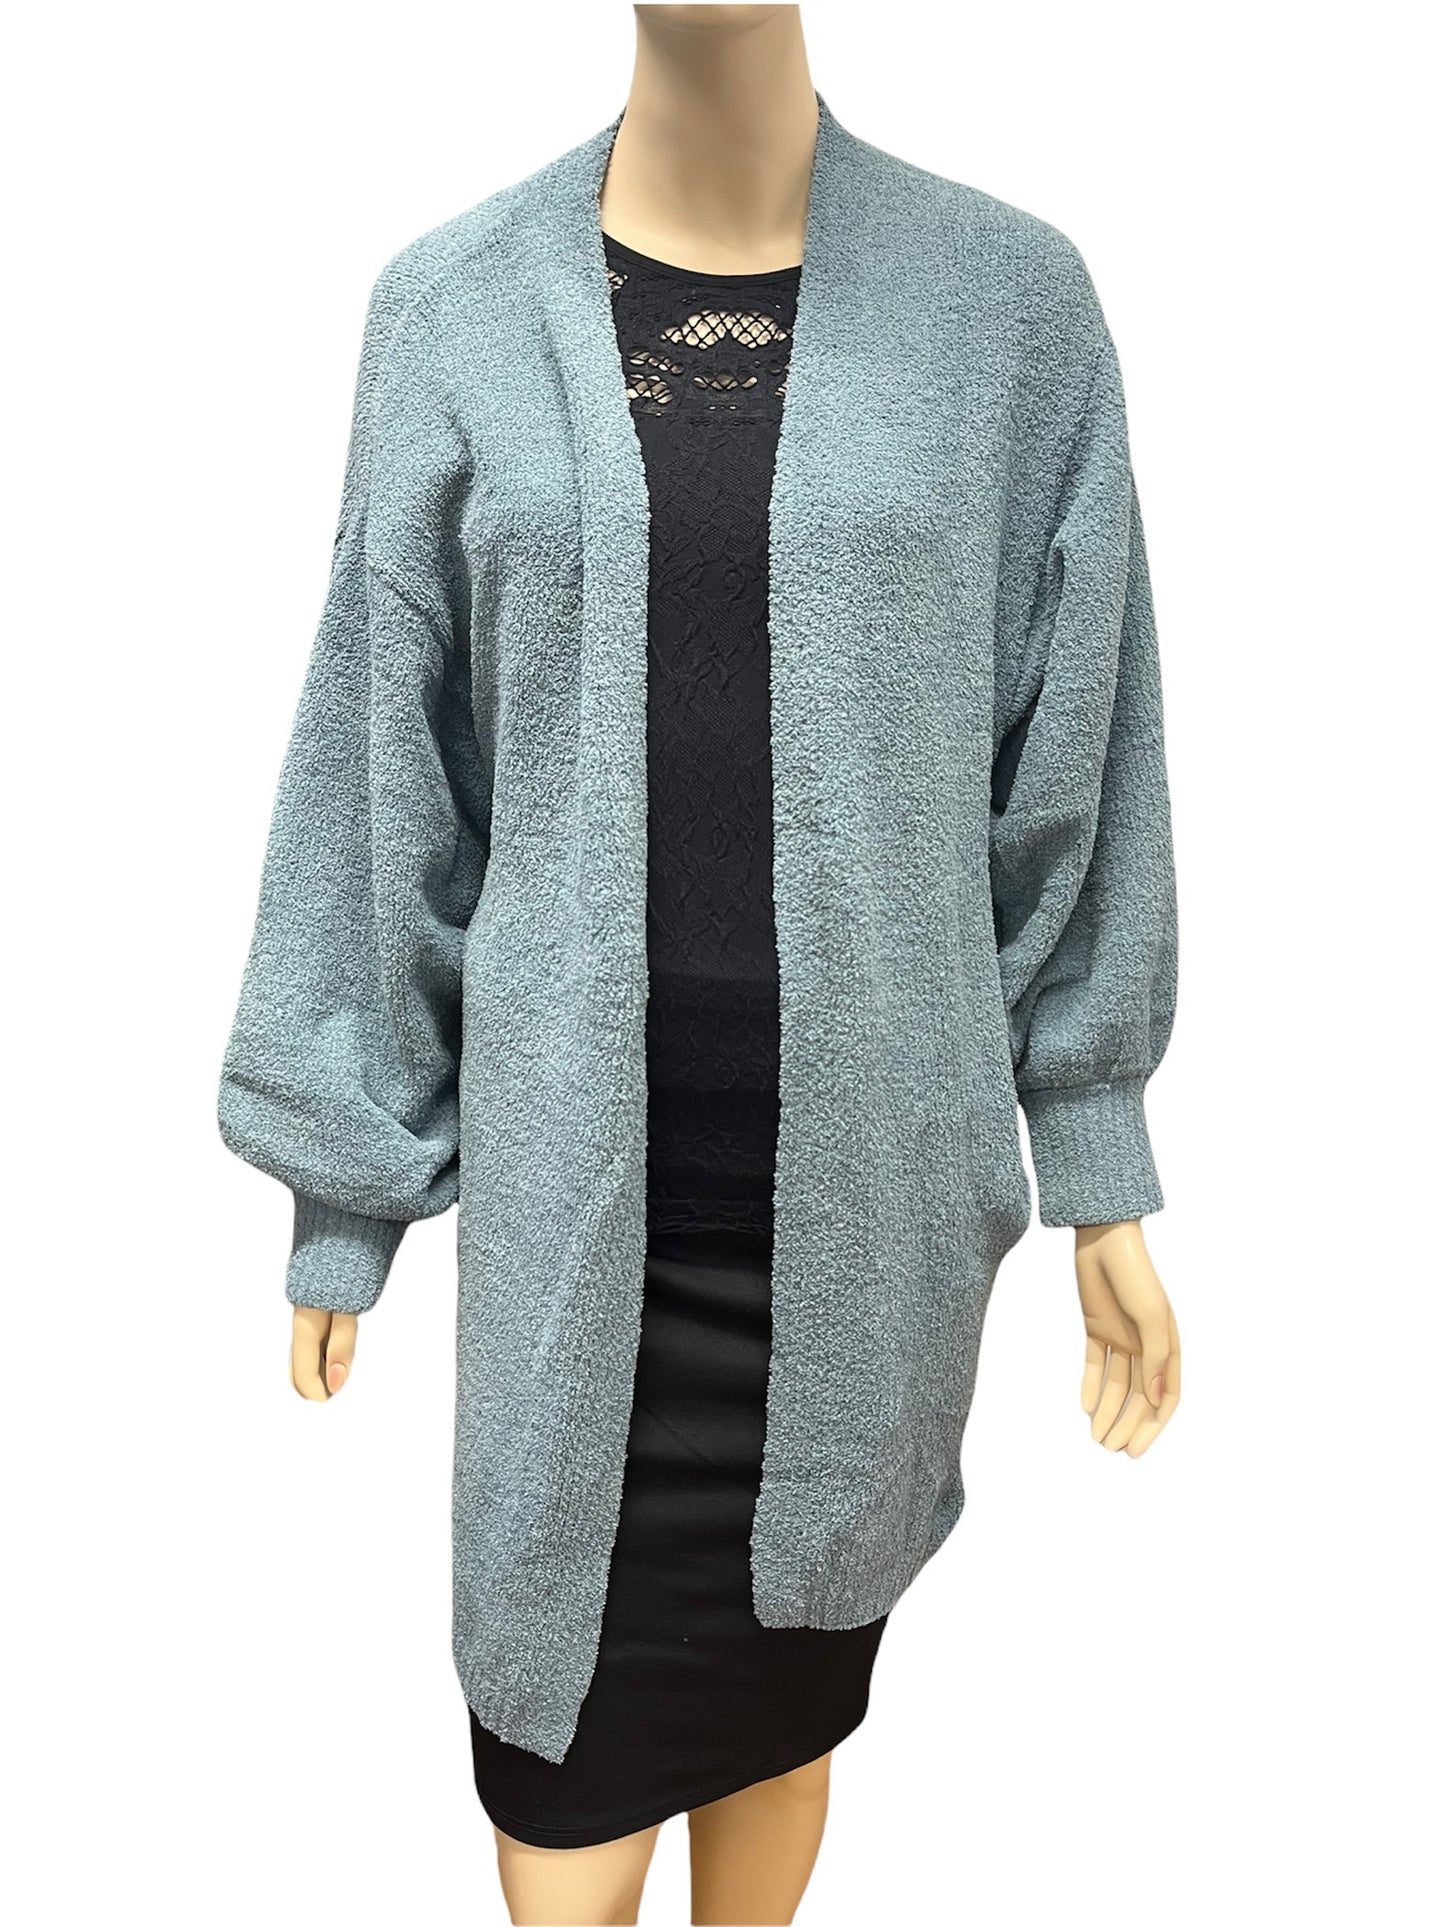 Teal Open Front Cardigan